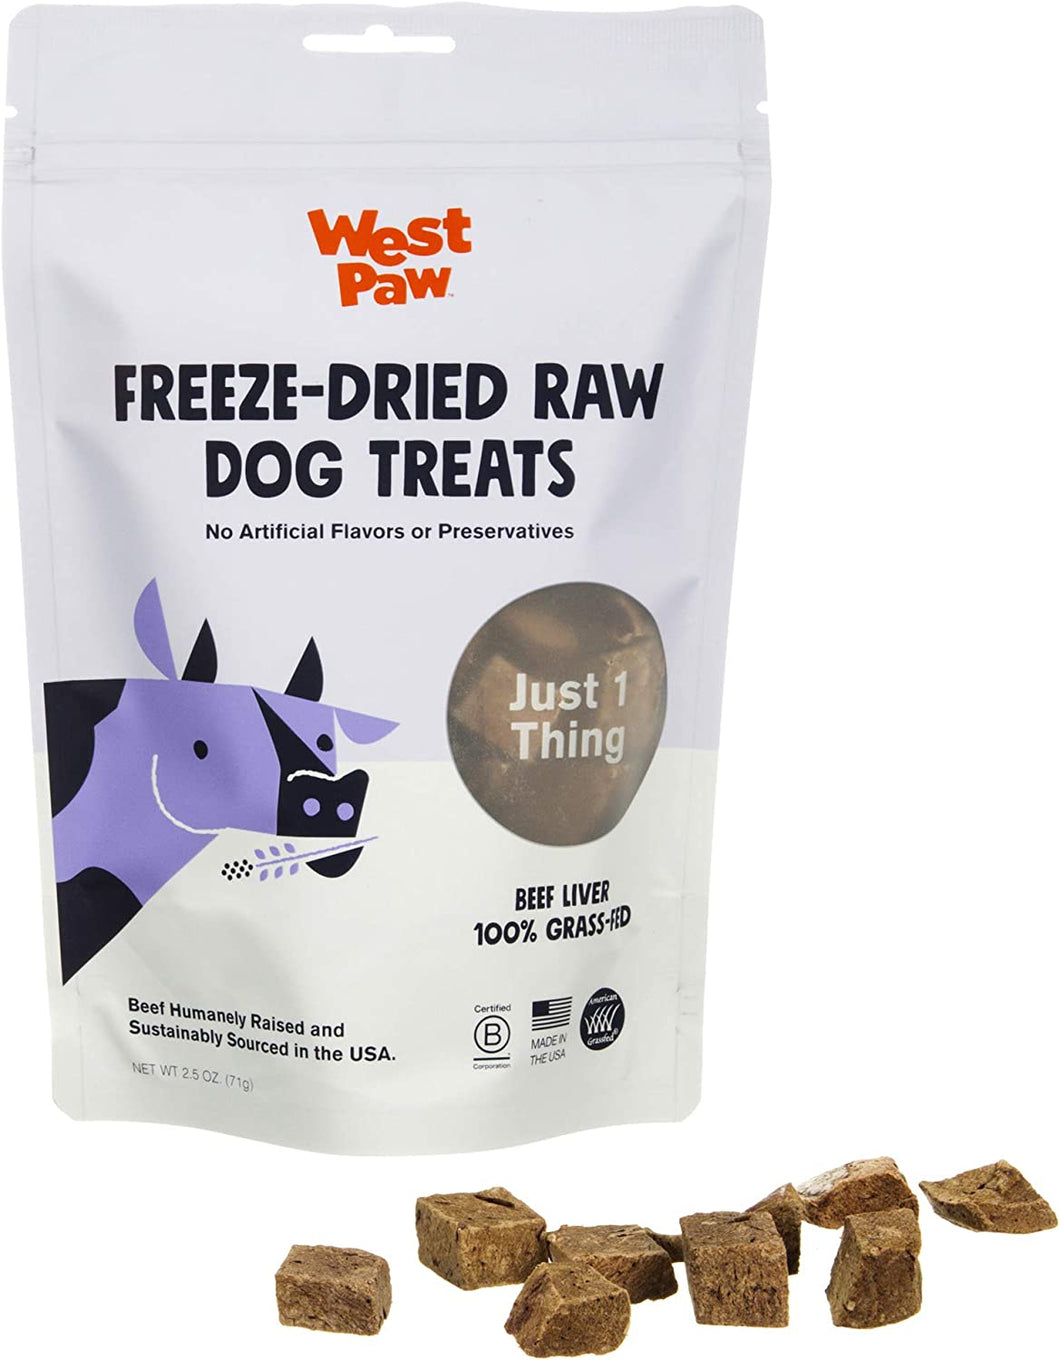 West Paw Freeze Dried Beef Liver Dog Treats - Beef Liver Single Ingredient Dog Treat